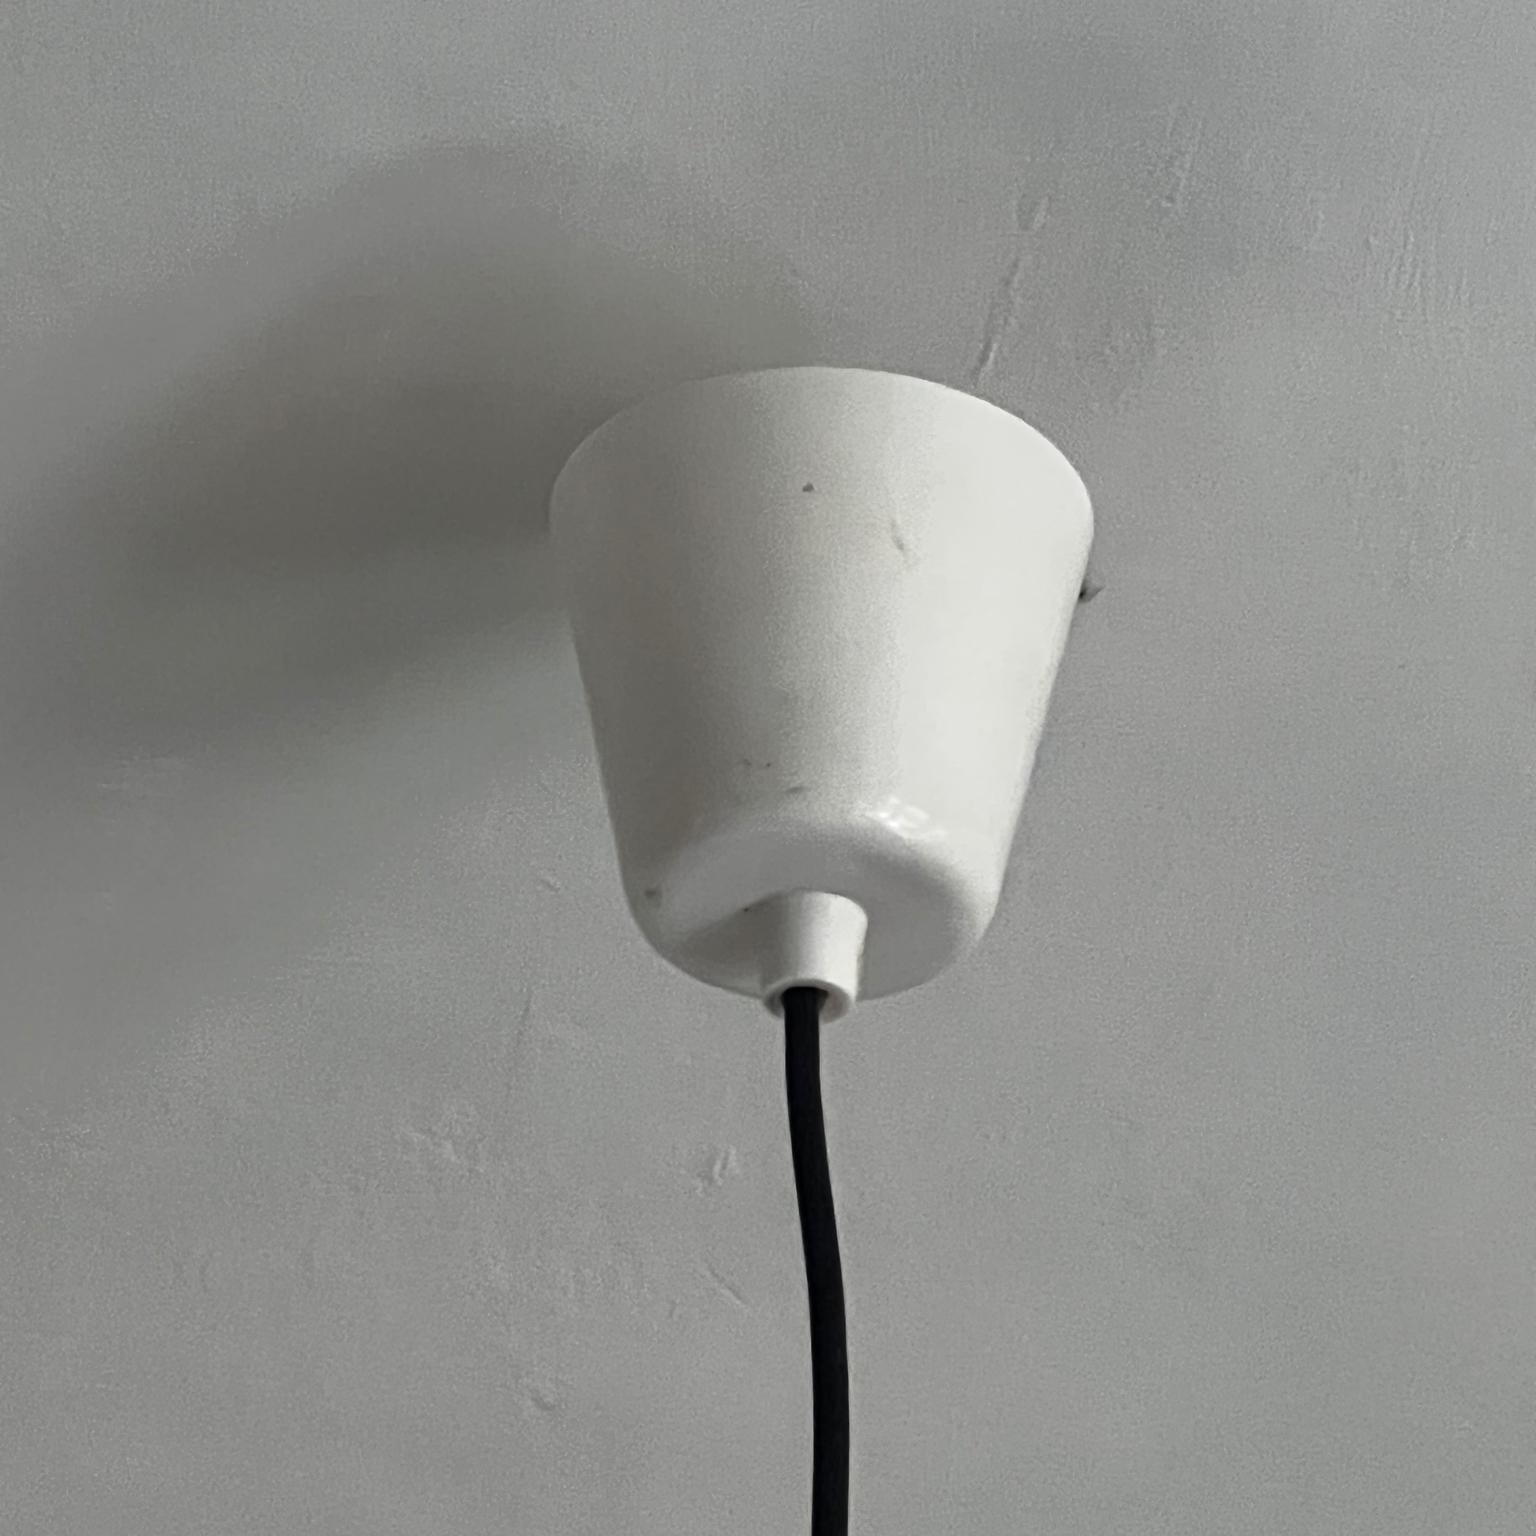 Pendant Lamp Model K 2-1 by Maria Lindeman for Idman of Finland Mid-20th Century For Sale 4